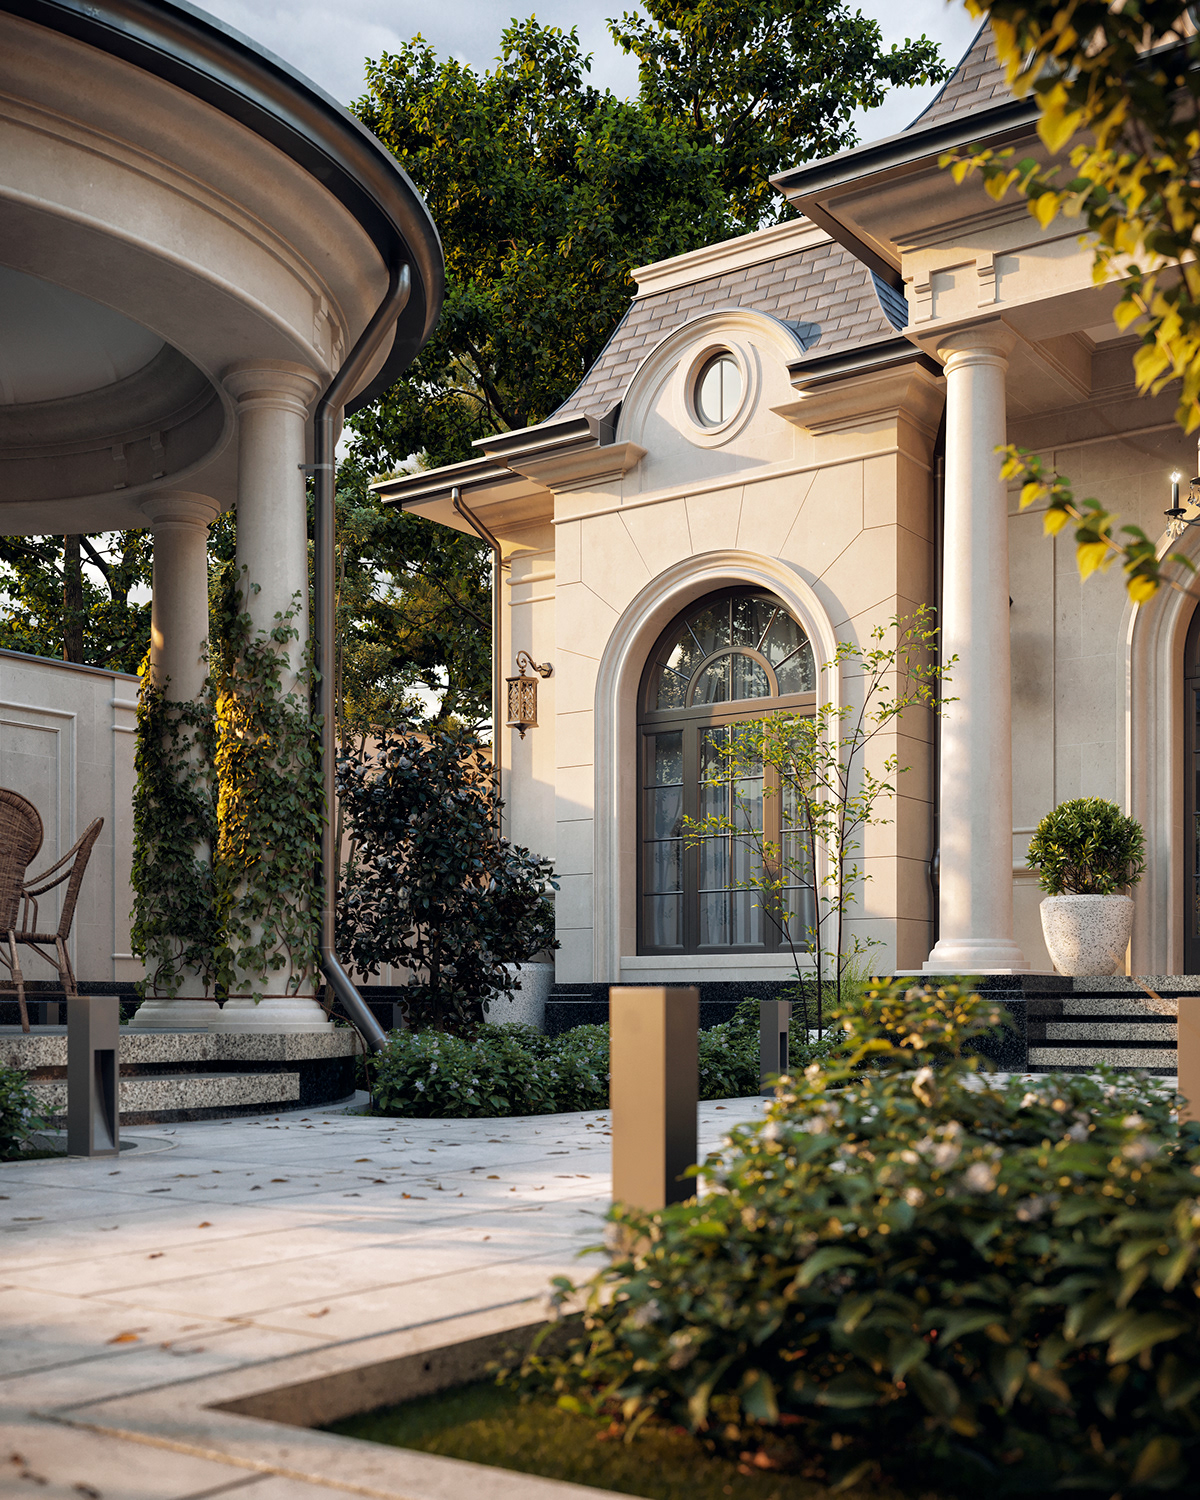 Outdoor Nature exterior night photography 3ds max architecture Render Classical facade